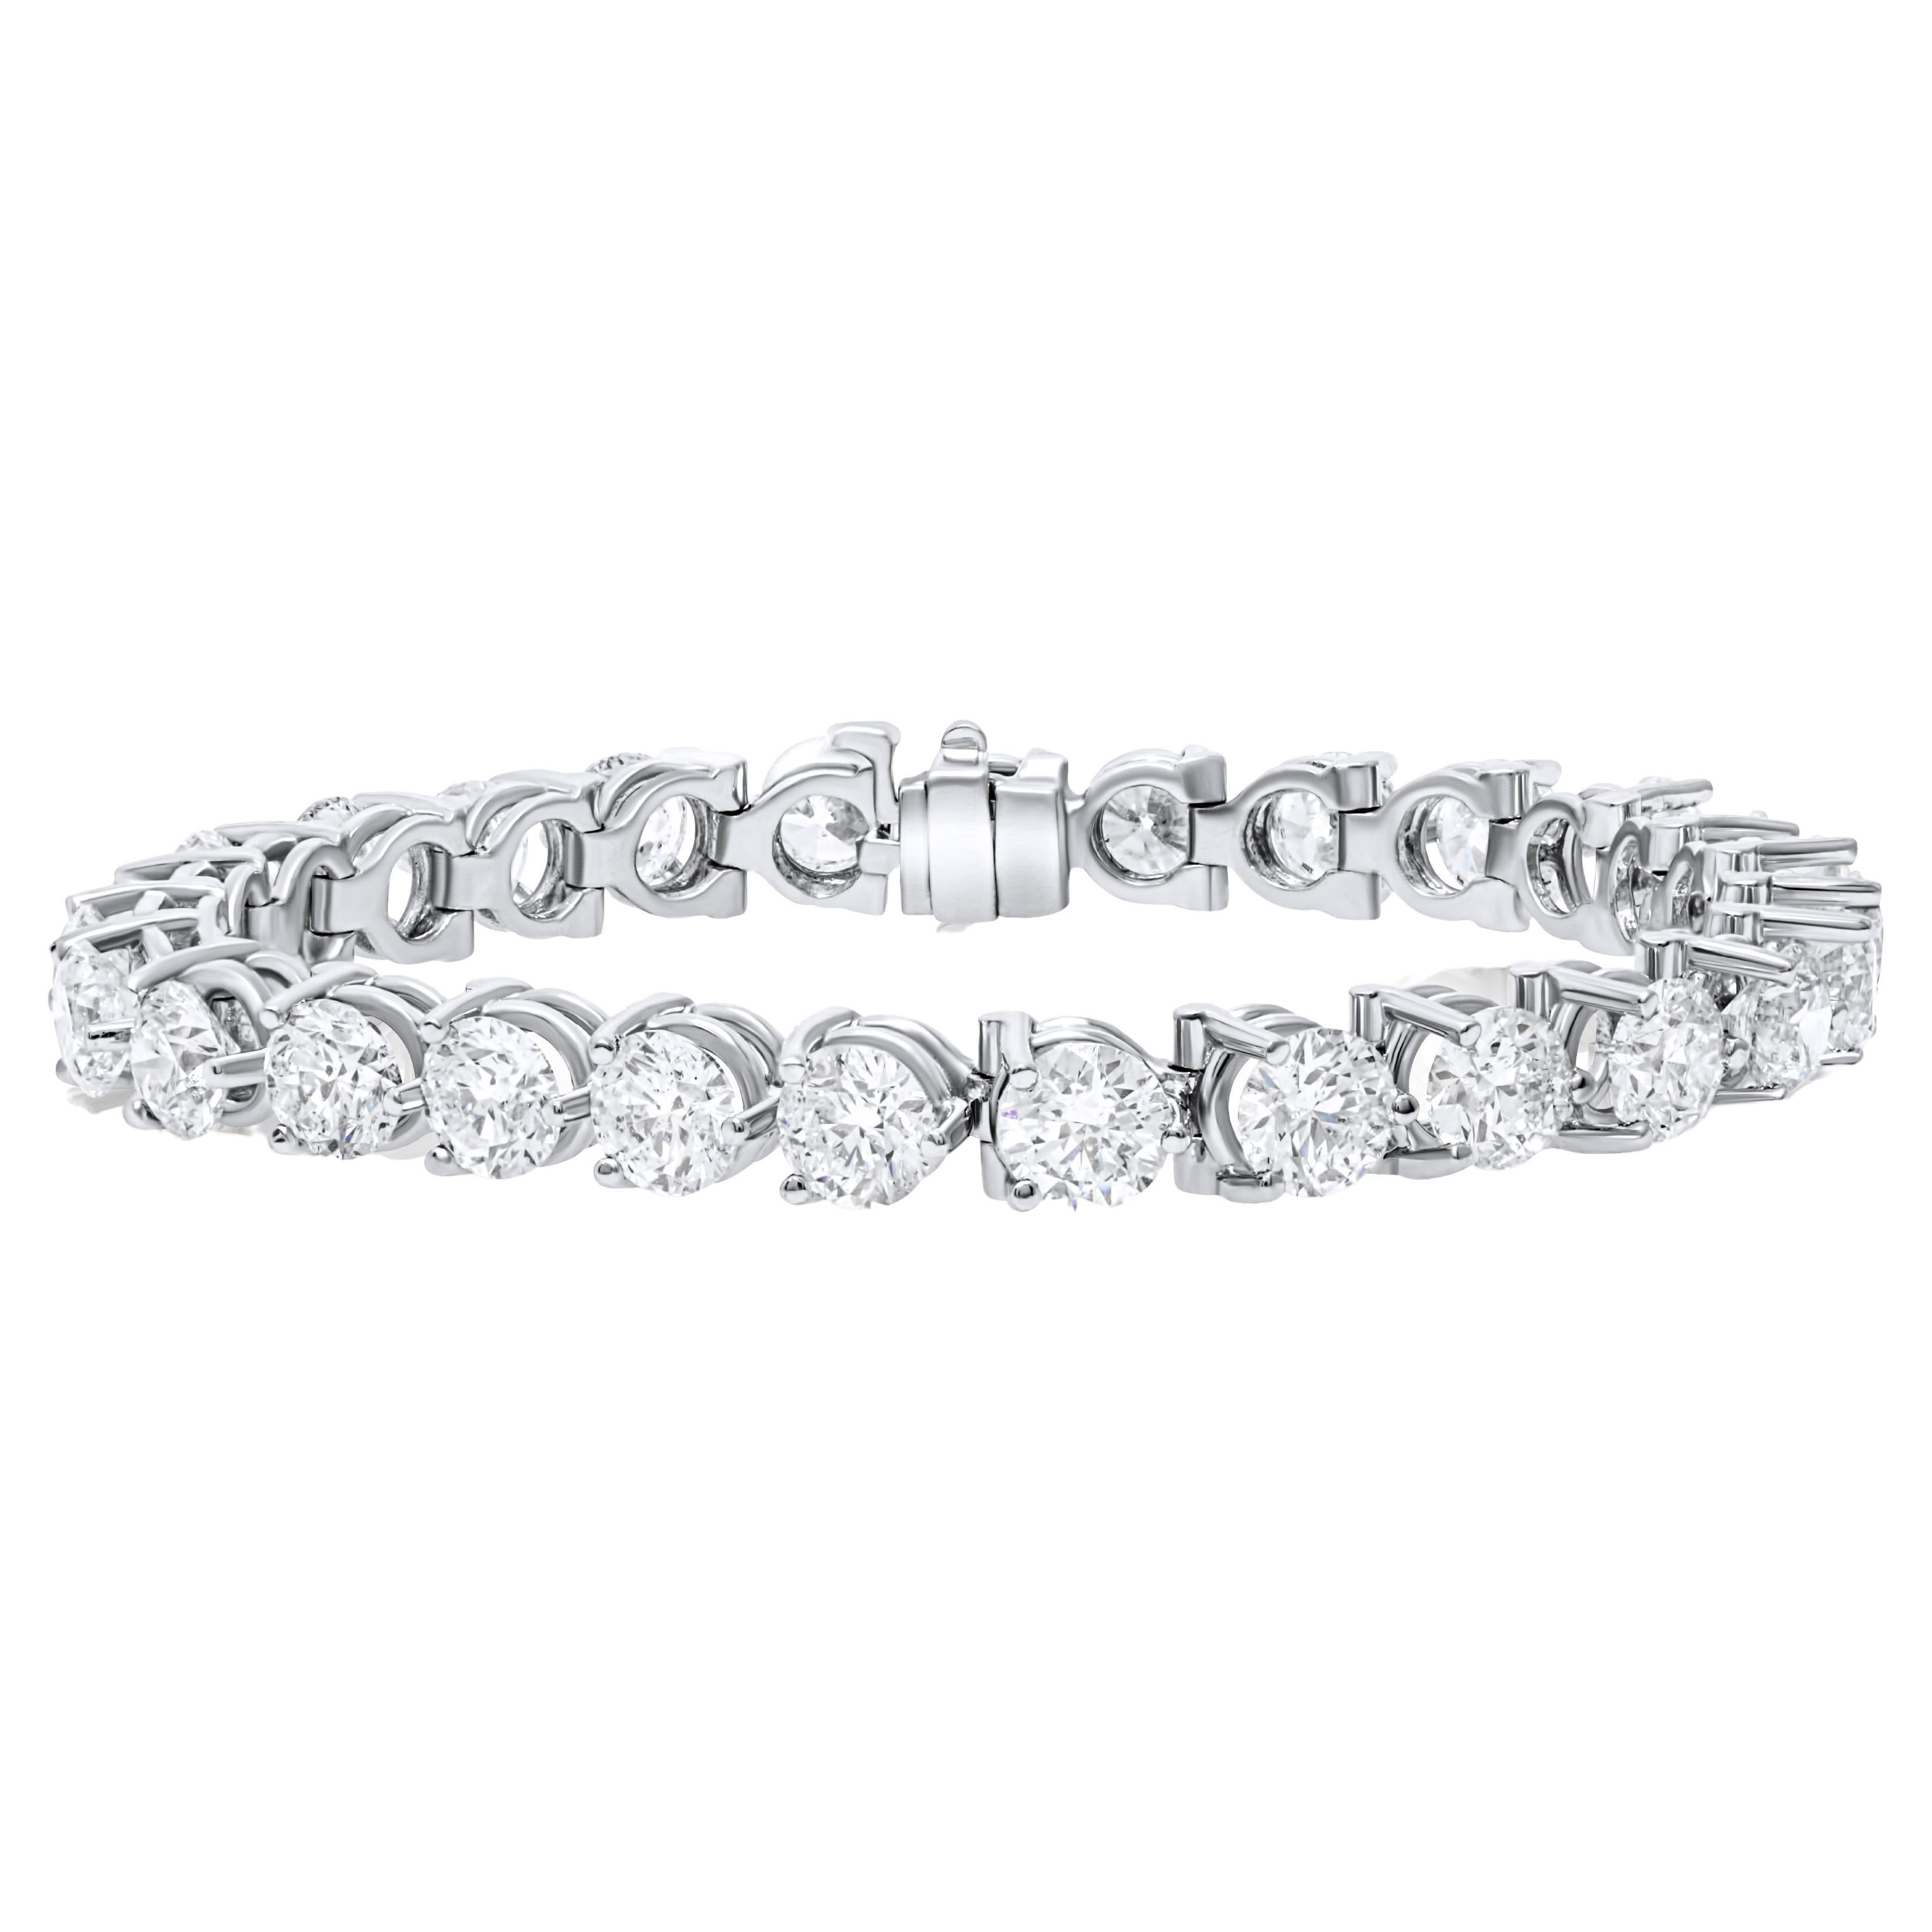 How many prongs should a tennis bracelet have?